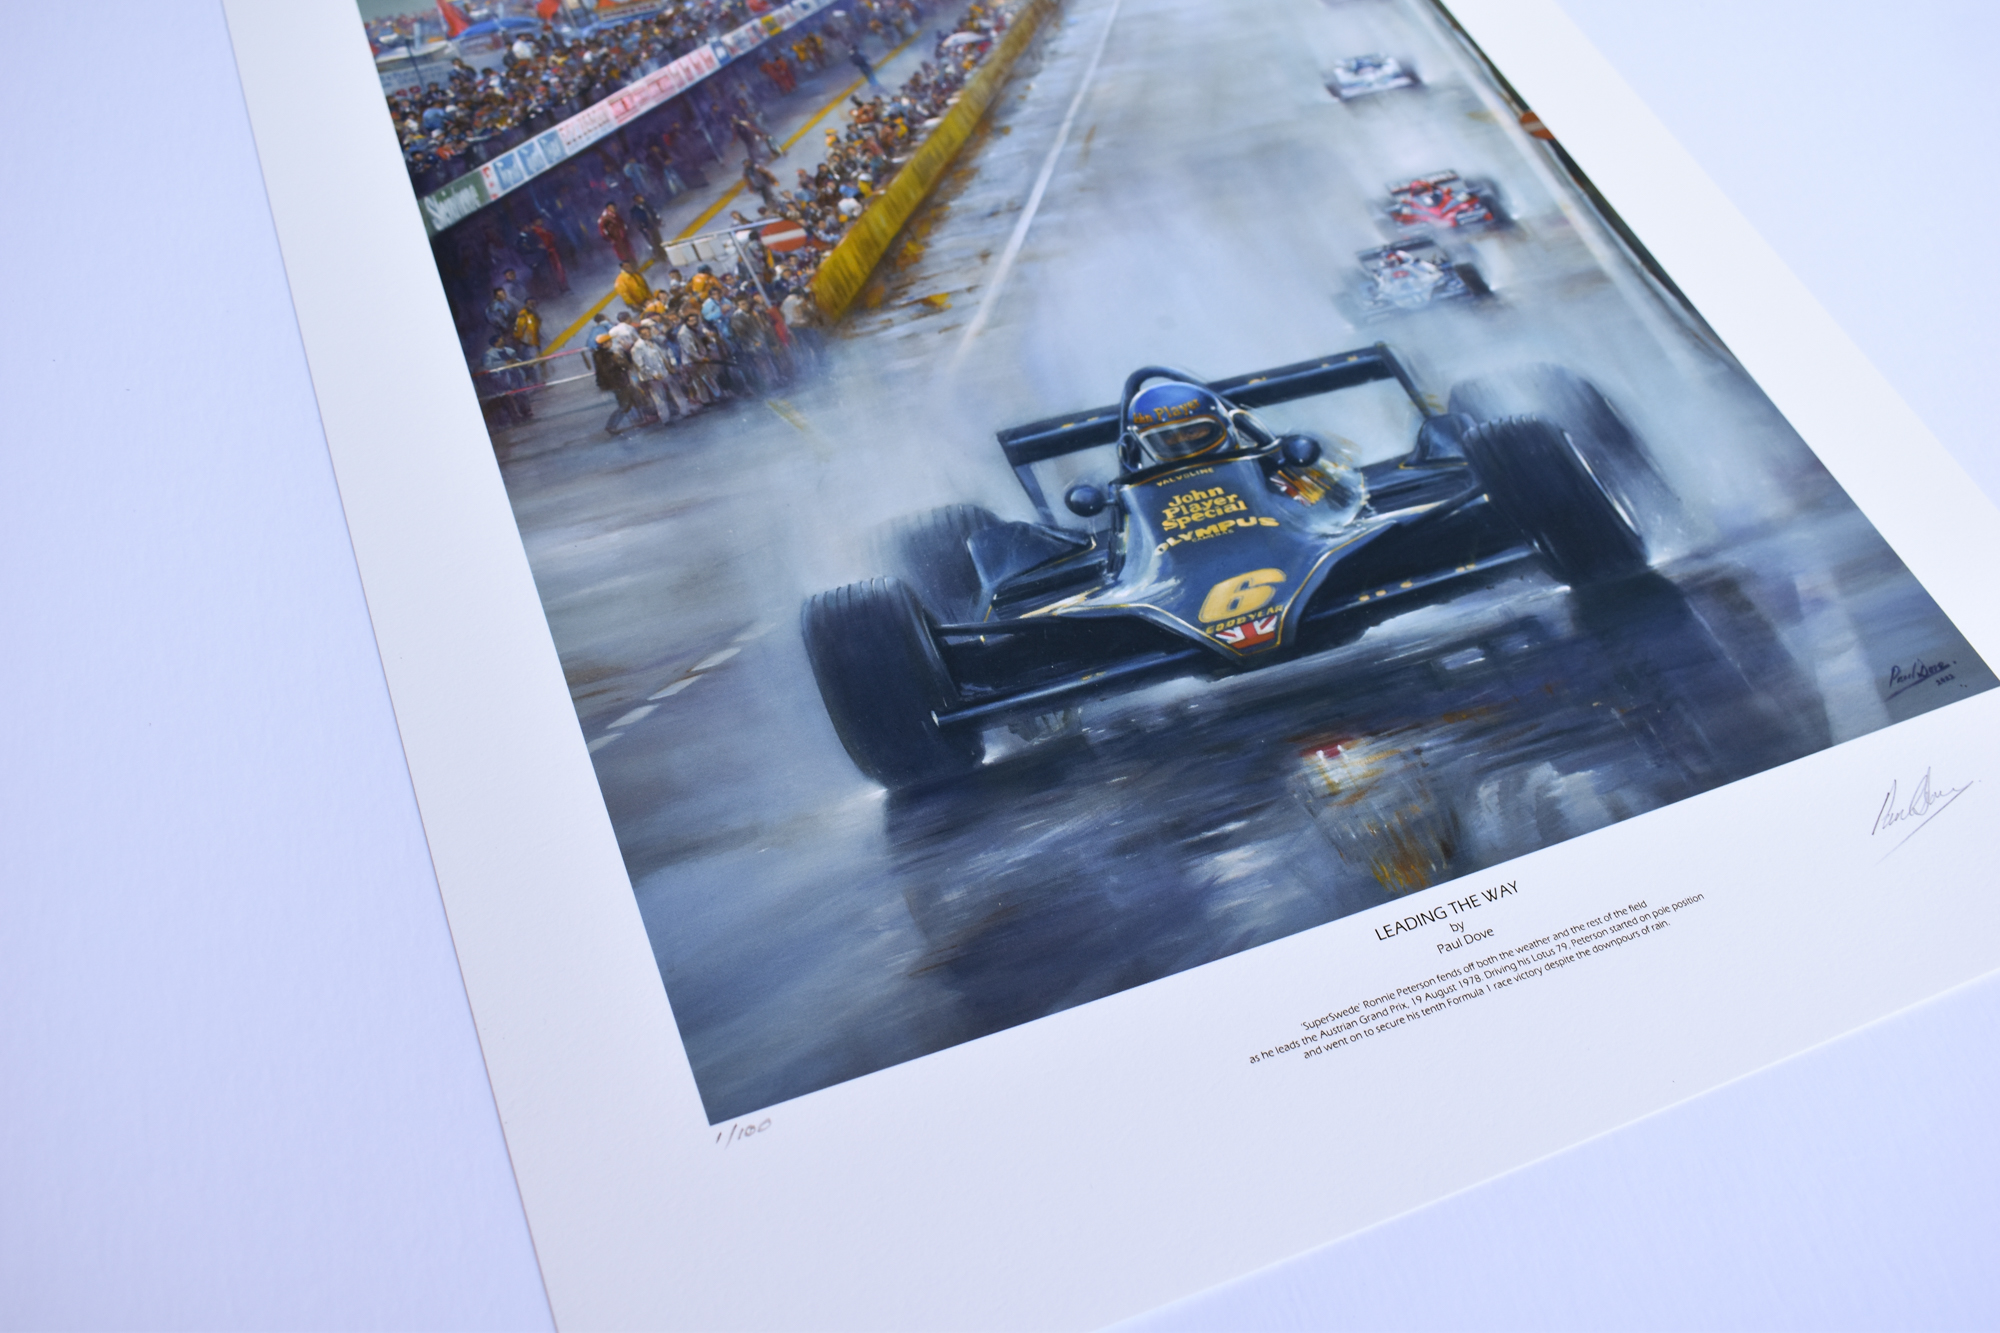 LEADING THE WAY – Ronnie Peterson Tribute – Limited Edition Print by Paul Dove